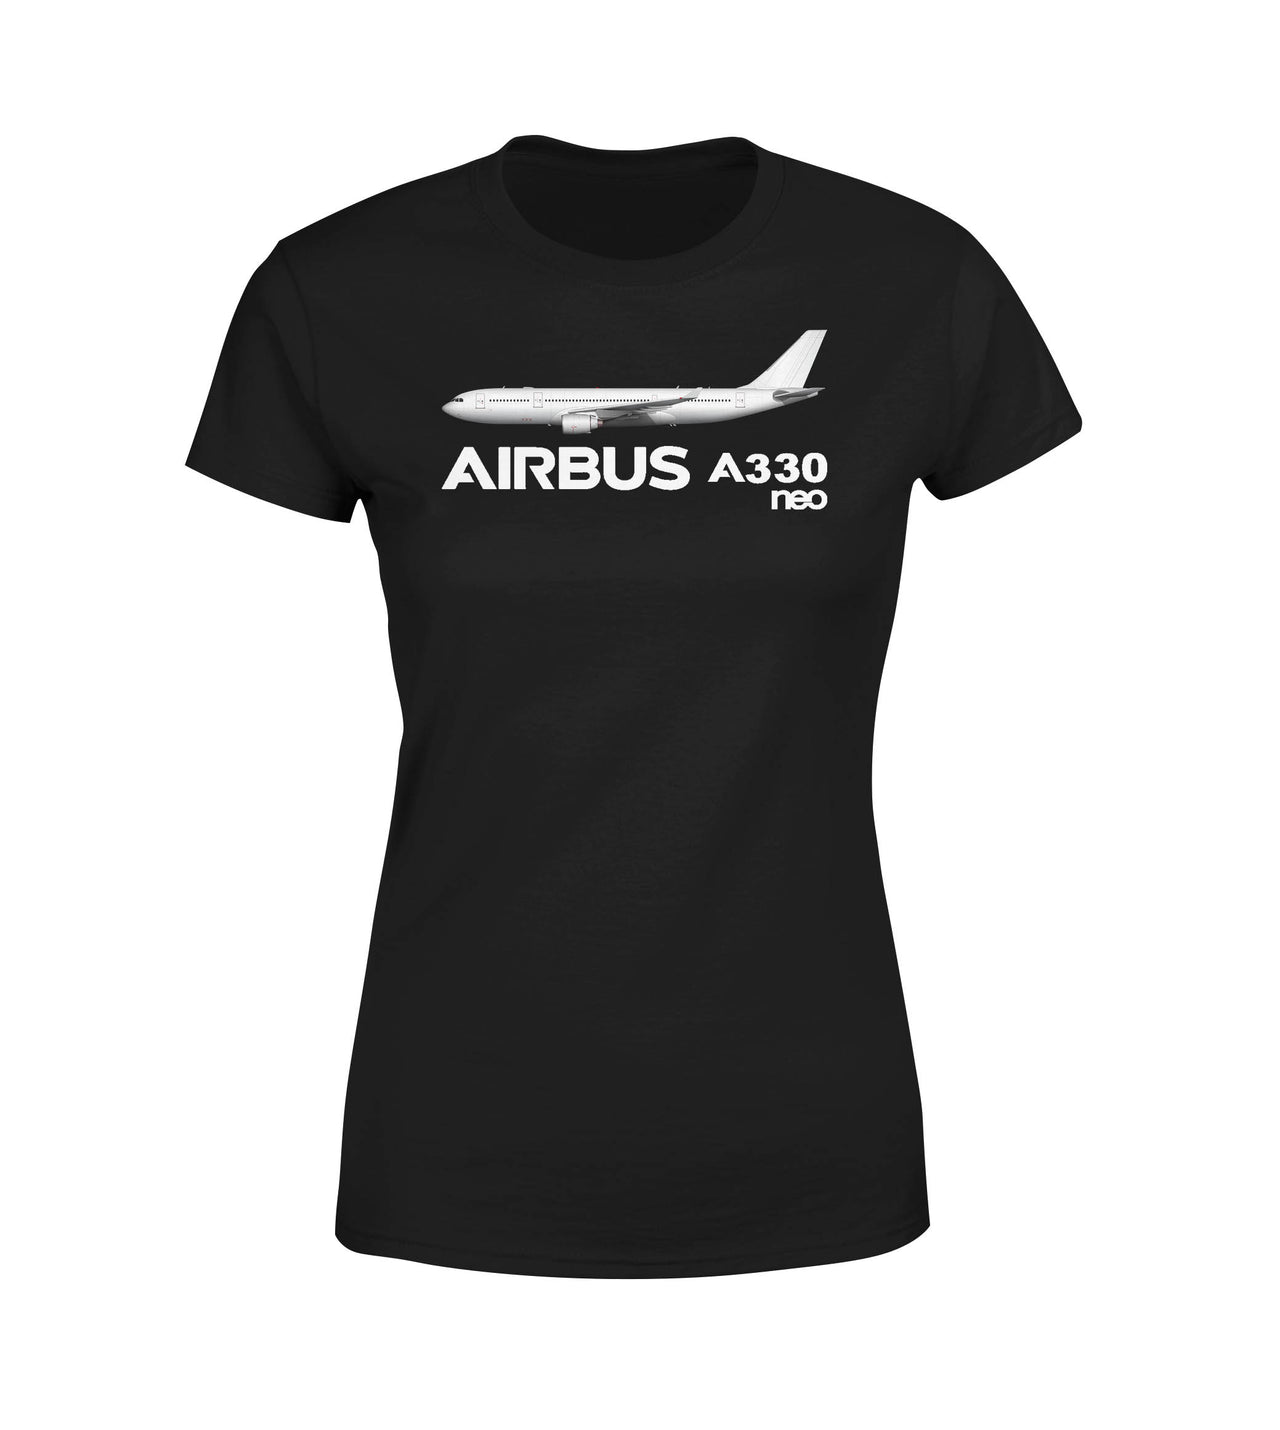 The Airbus A330neo Designed Women T-Shirts